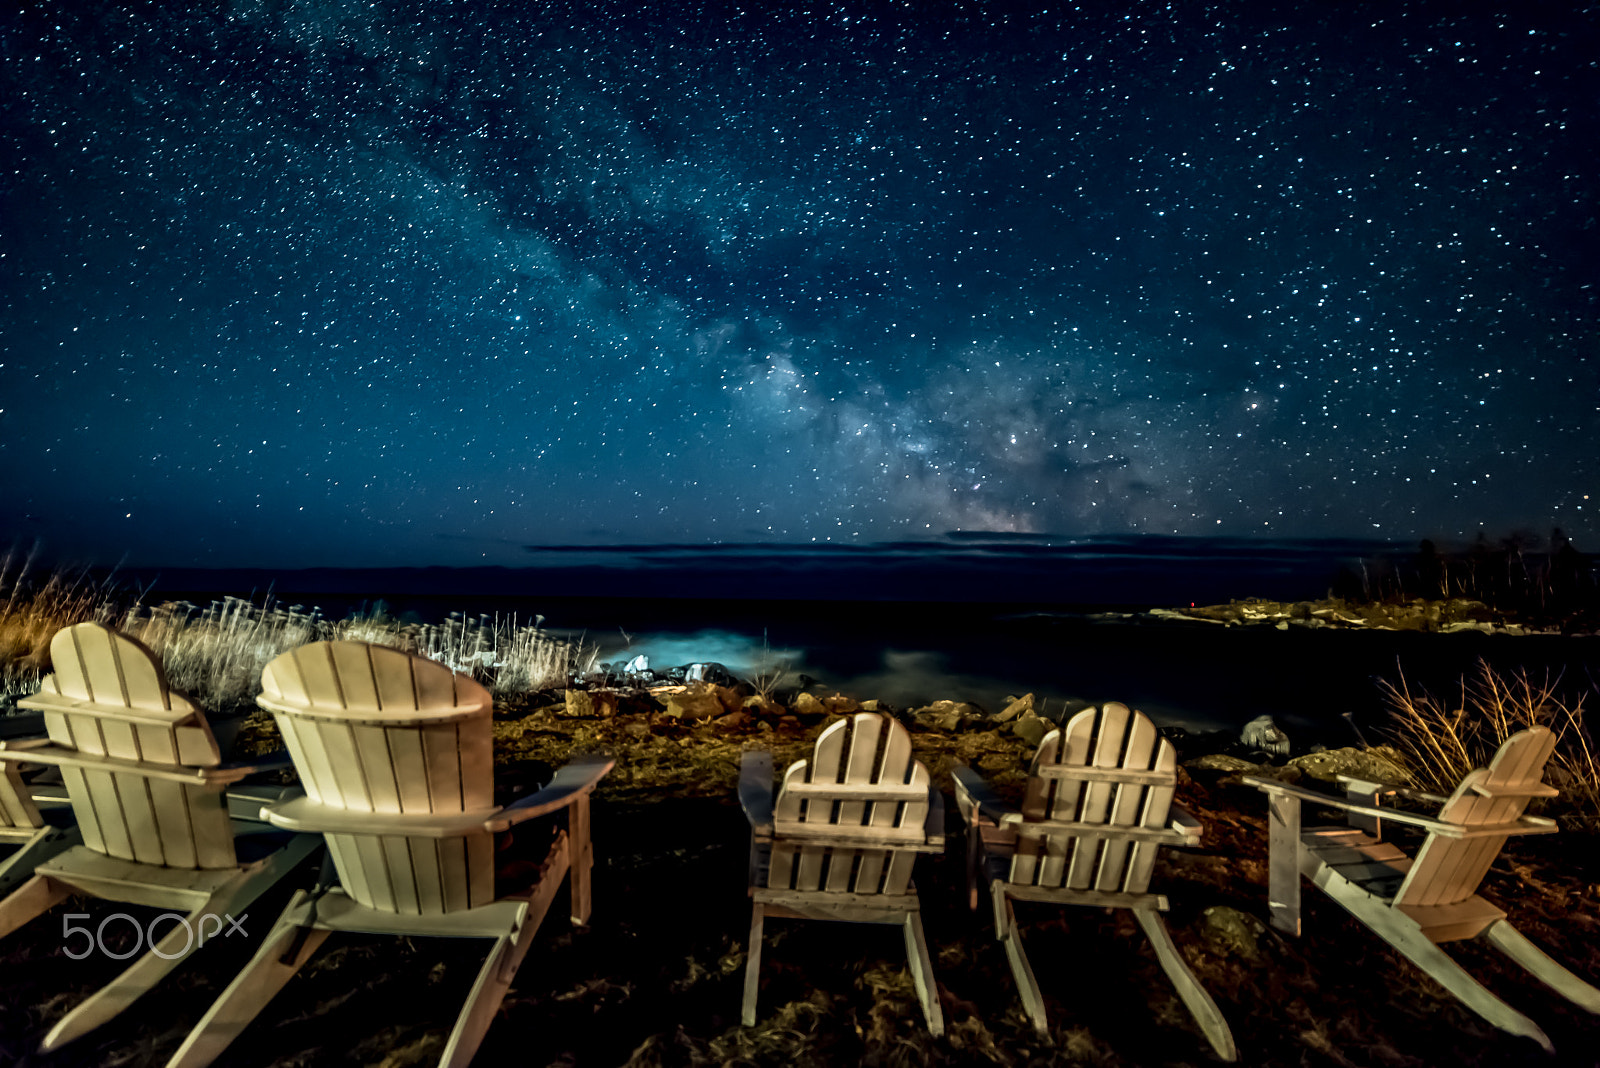 Nikon D810A sample photo. Open seating for the stars photography